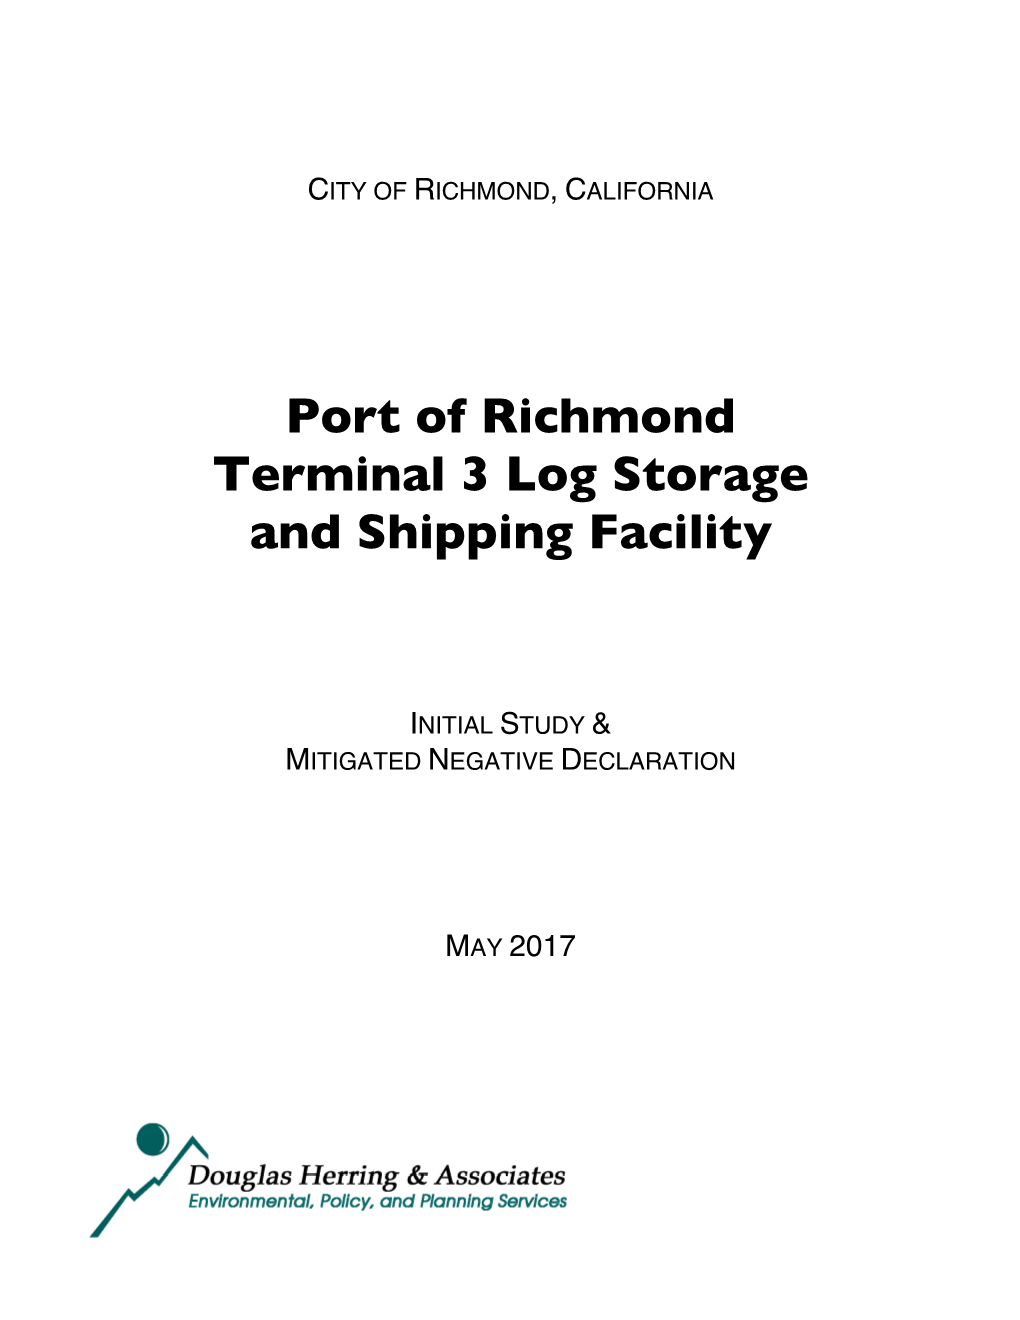 Port of Richmond Terminal 3 Log Storage and Shipping Facility